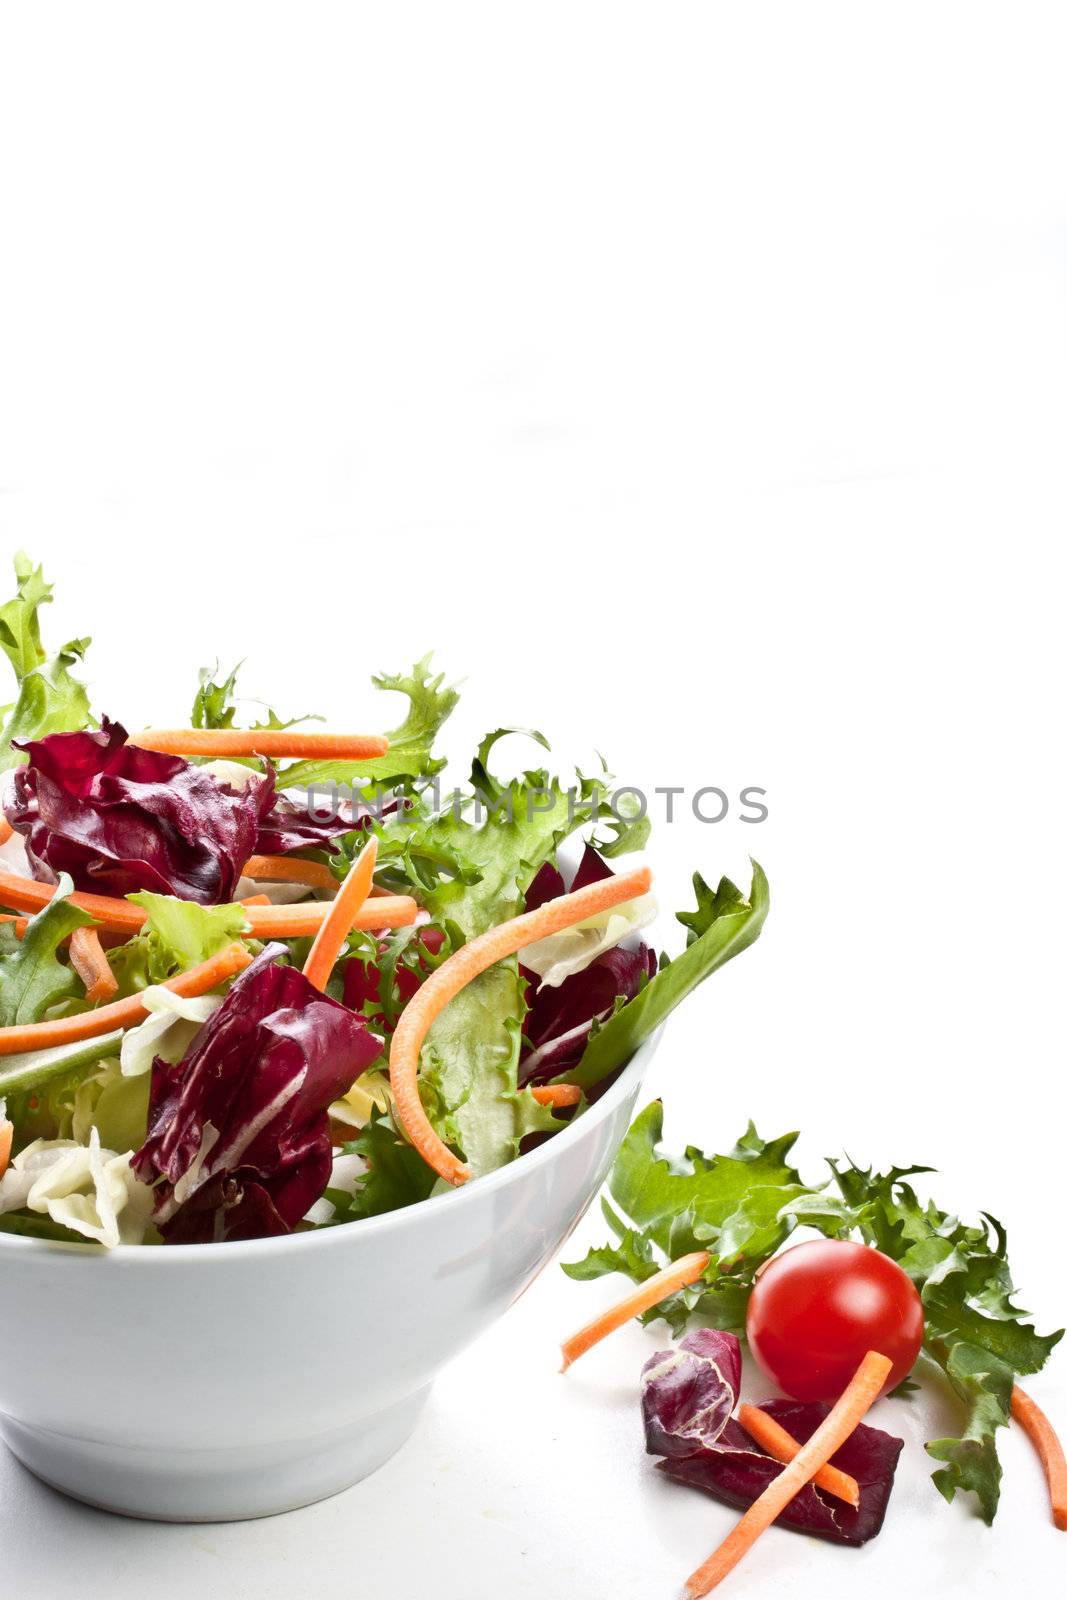 mixed salad on a bowl - withe background